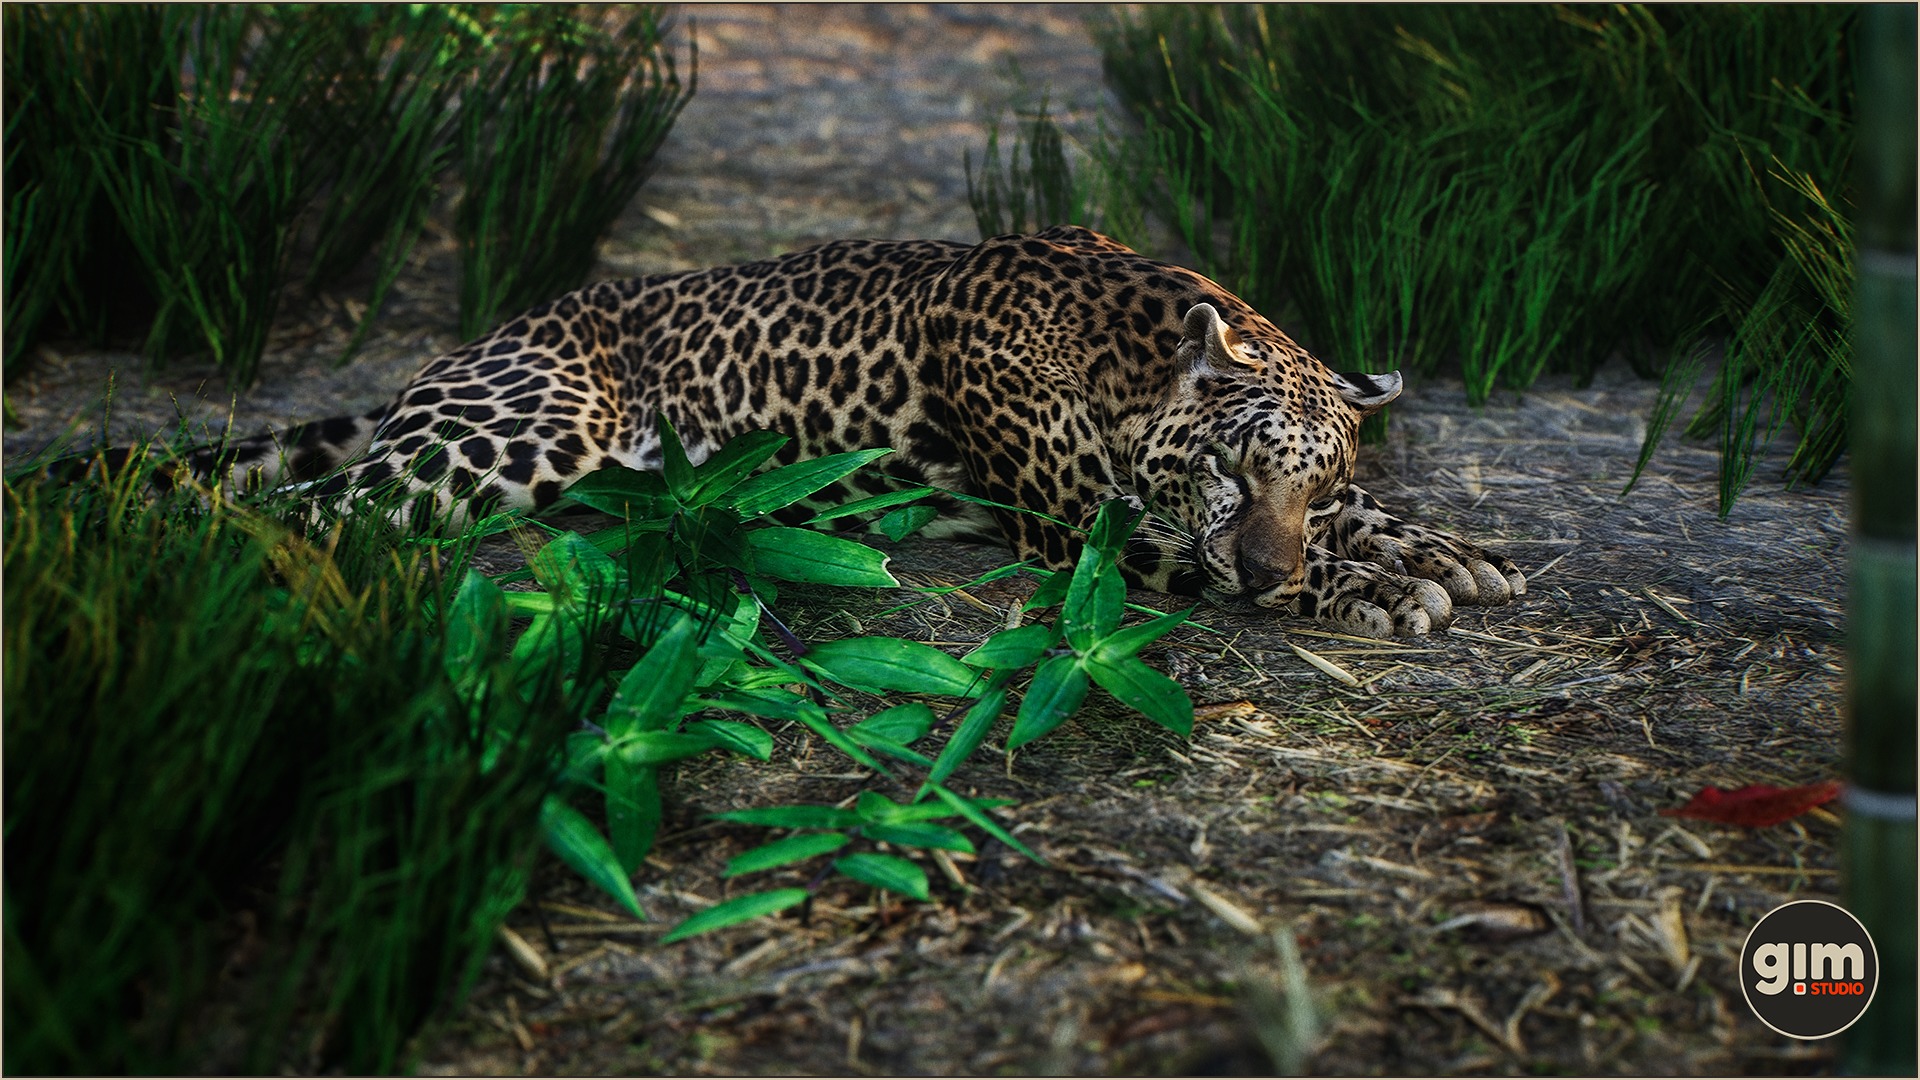 Male Leopard sleeping after tasty supper.